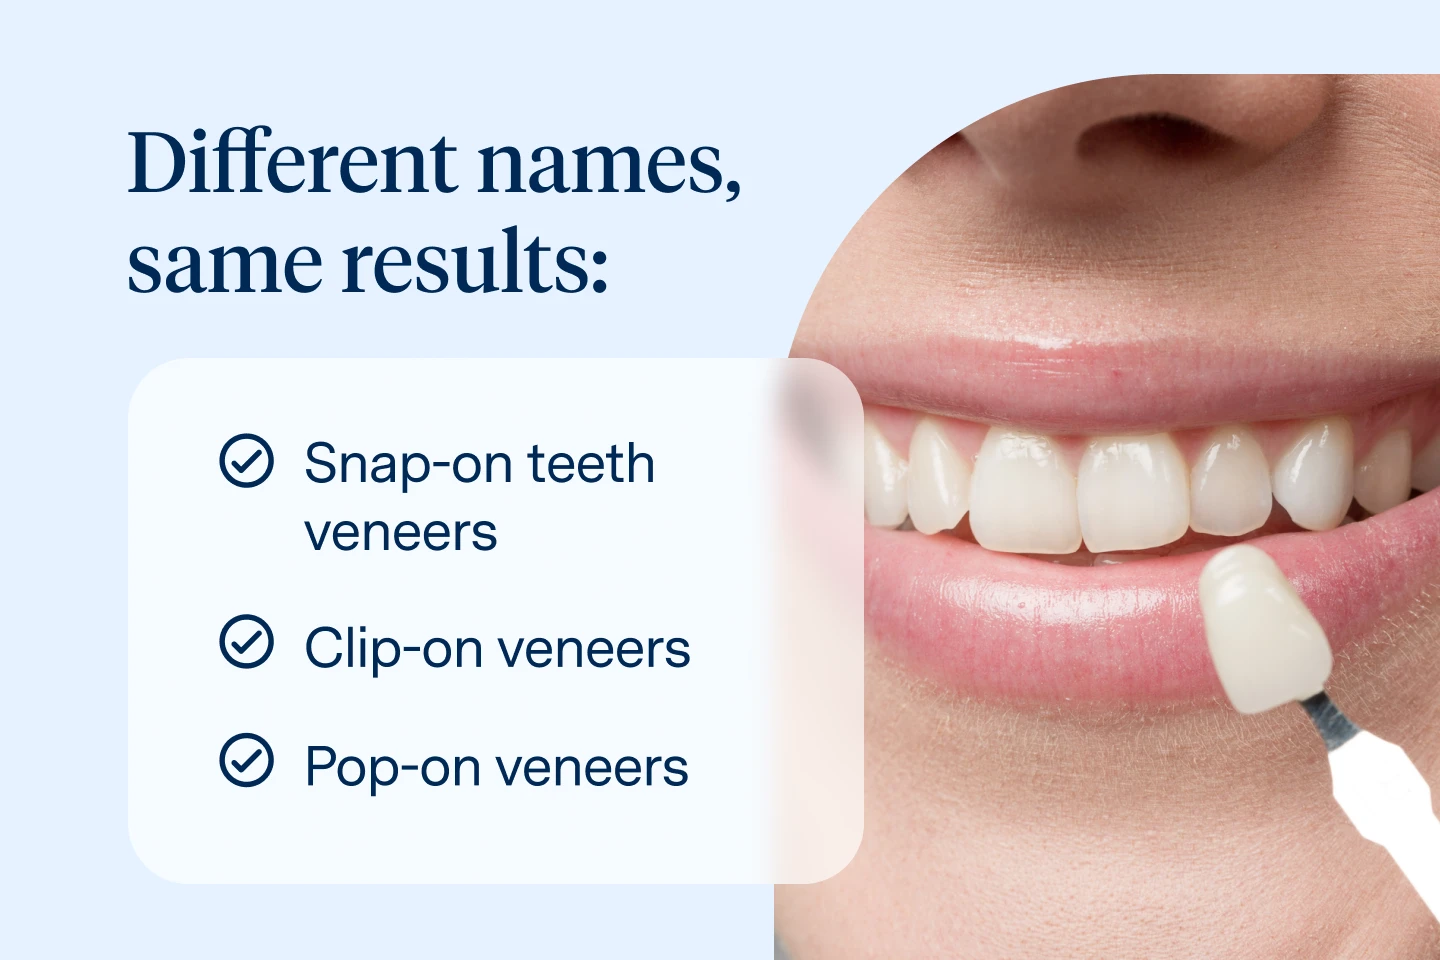 Different names, same results. Snap on veneers, clip-on veneers, pop-on veneers. 